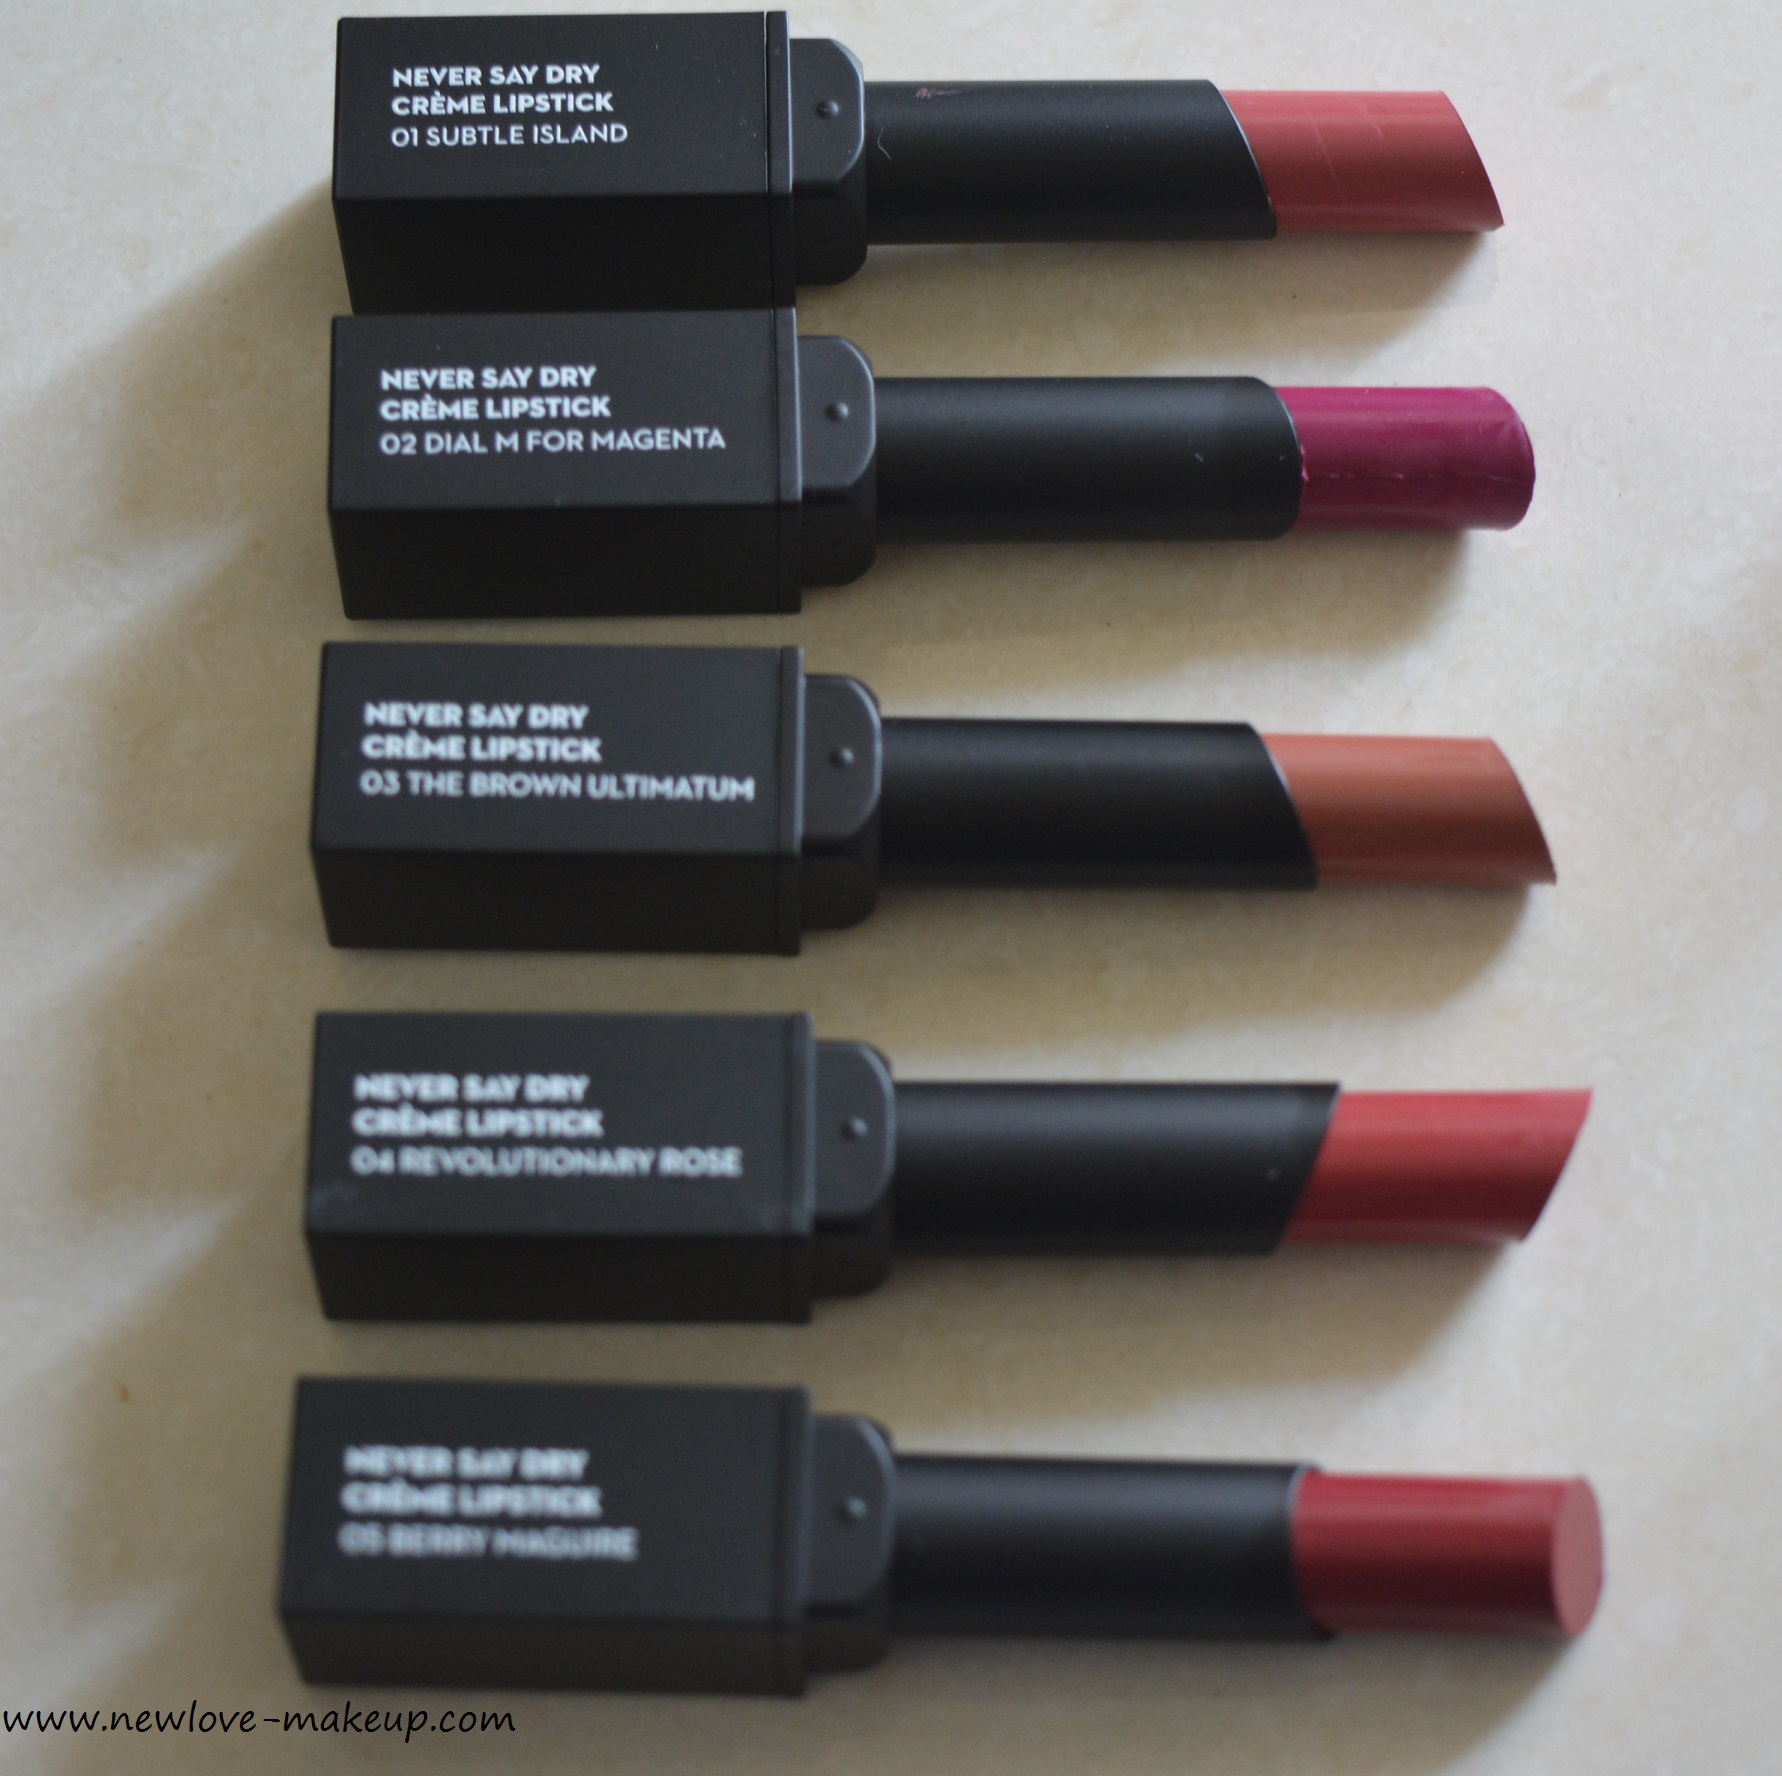 New Sugar Cosmetics Never Say Dry Creme Lipsticks Review, Swatches